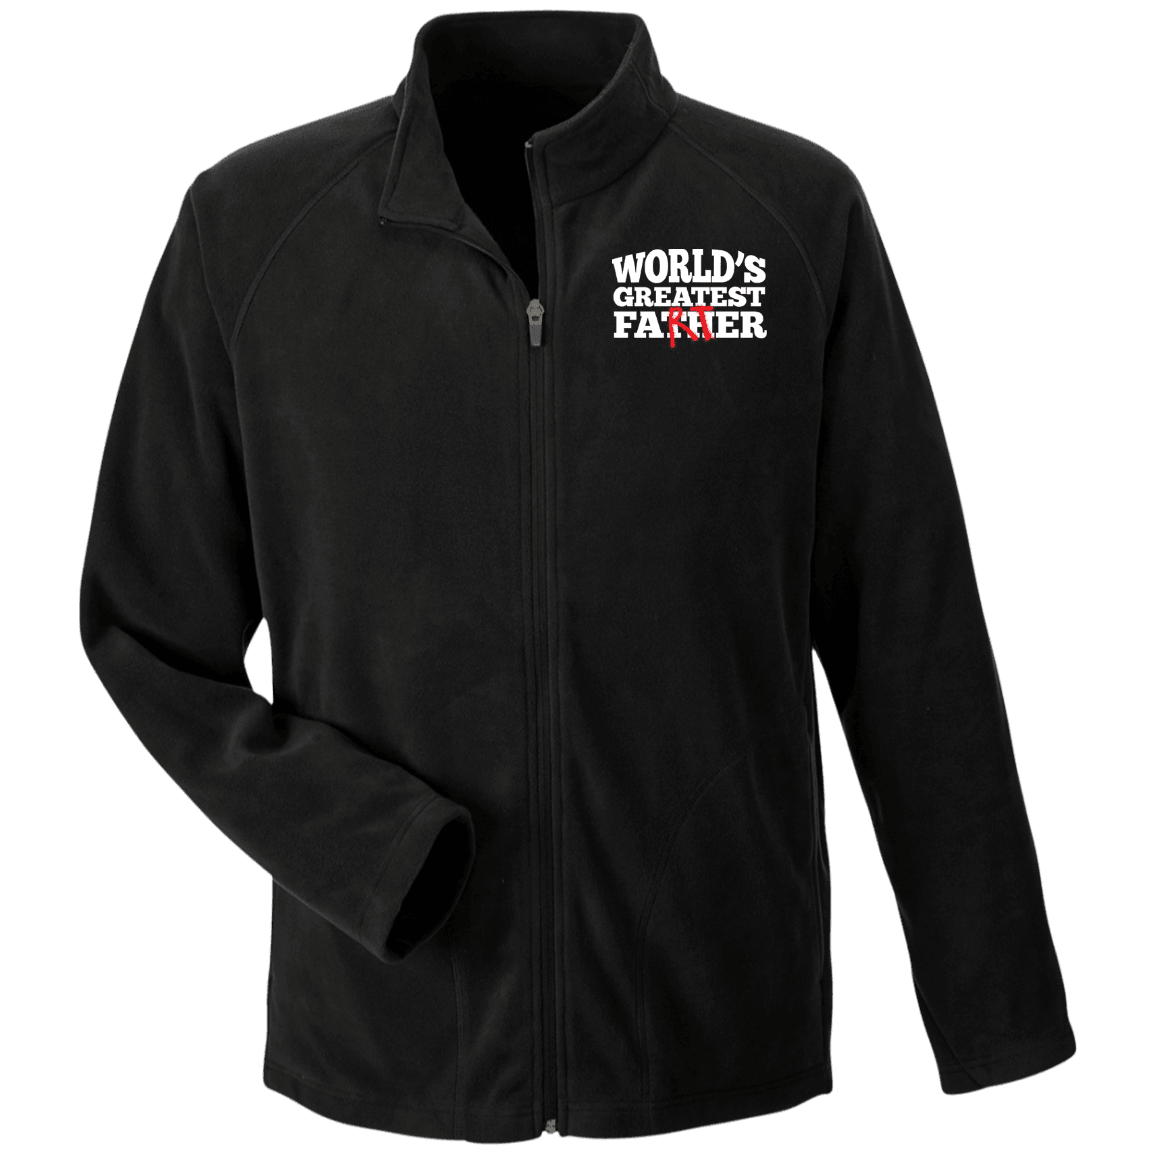 Designs by MyUtopia Shout Out:Worlds Greatest Father (Farter) Embroidered Team 365 Microfleece Unisex Jacket - Black,Black / X-Small,Jackets